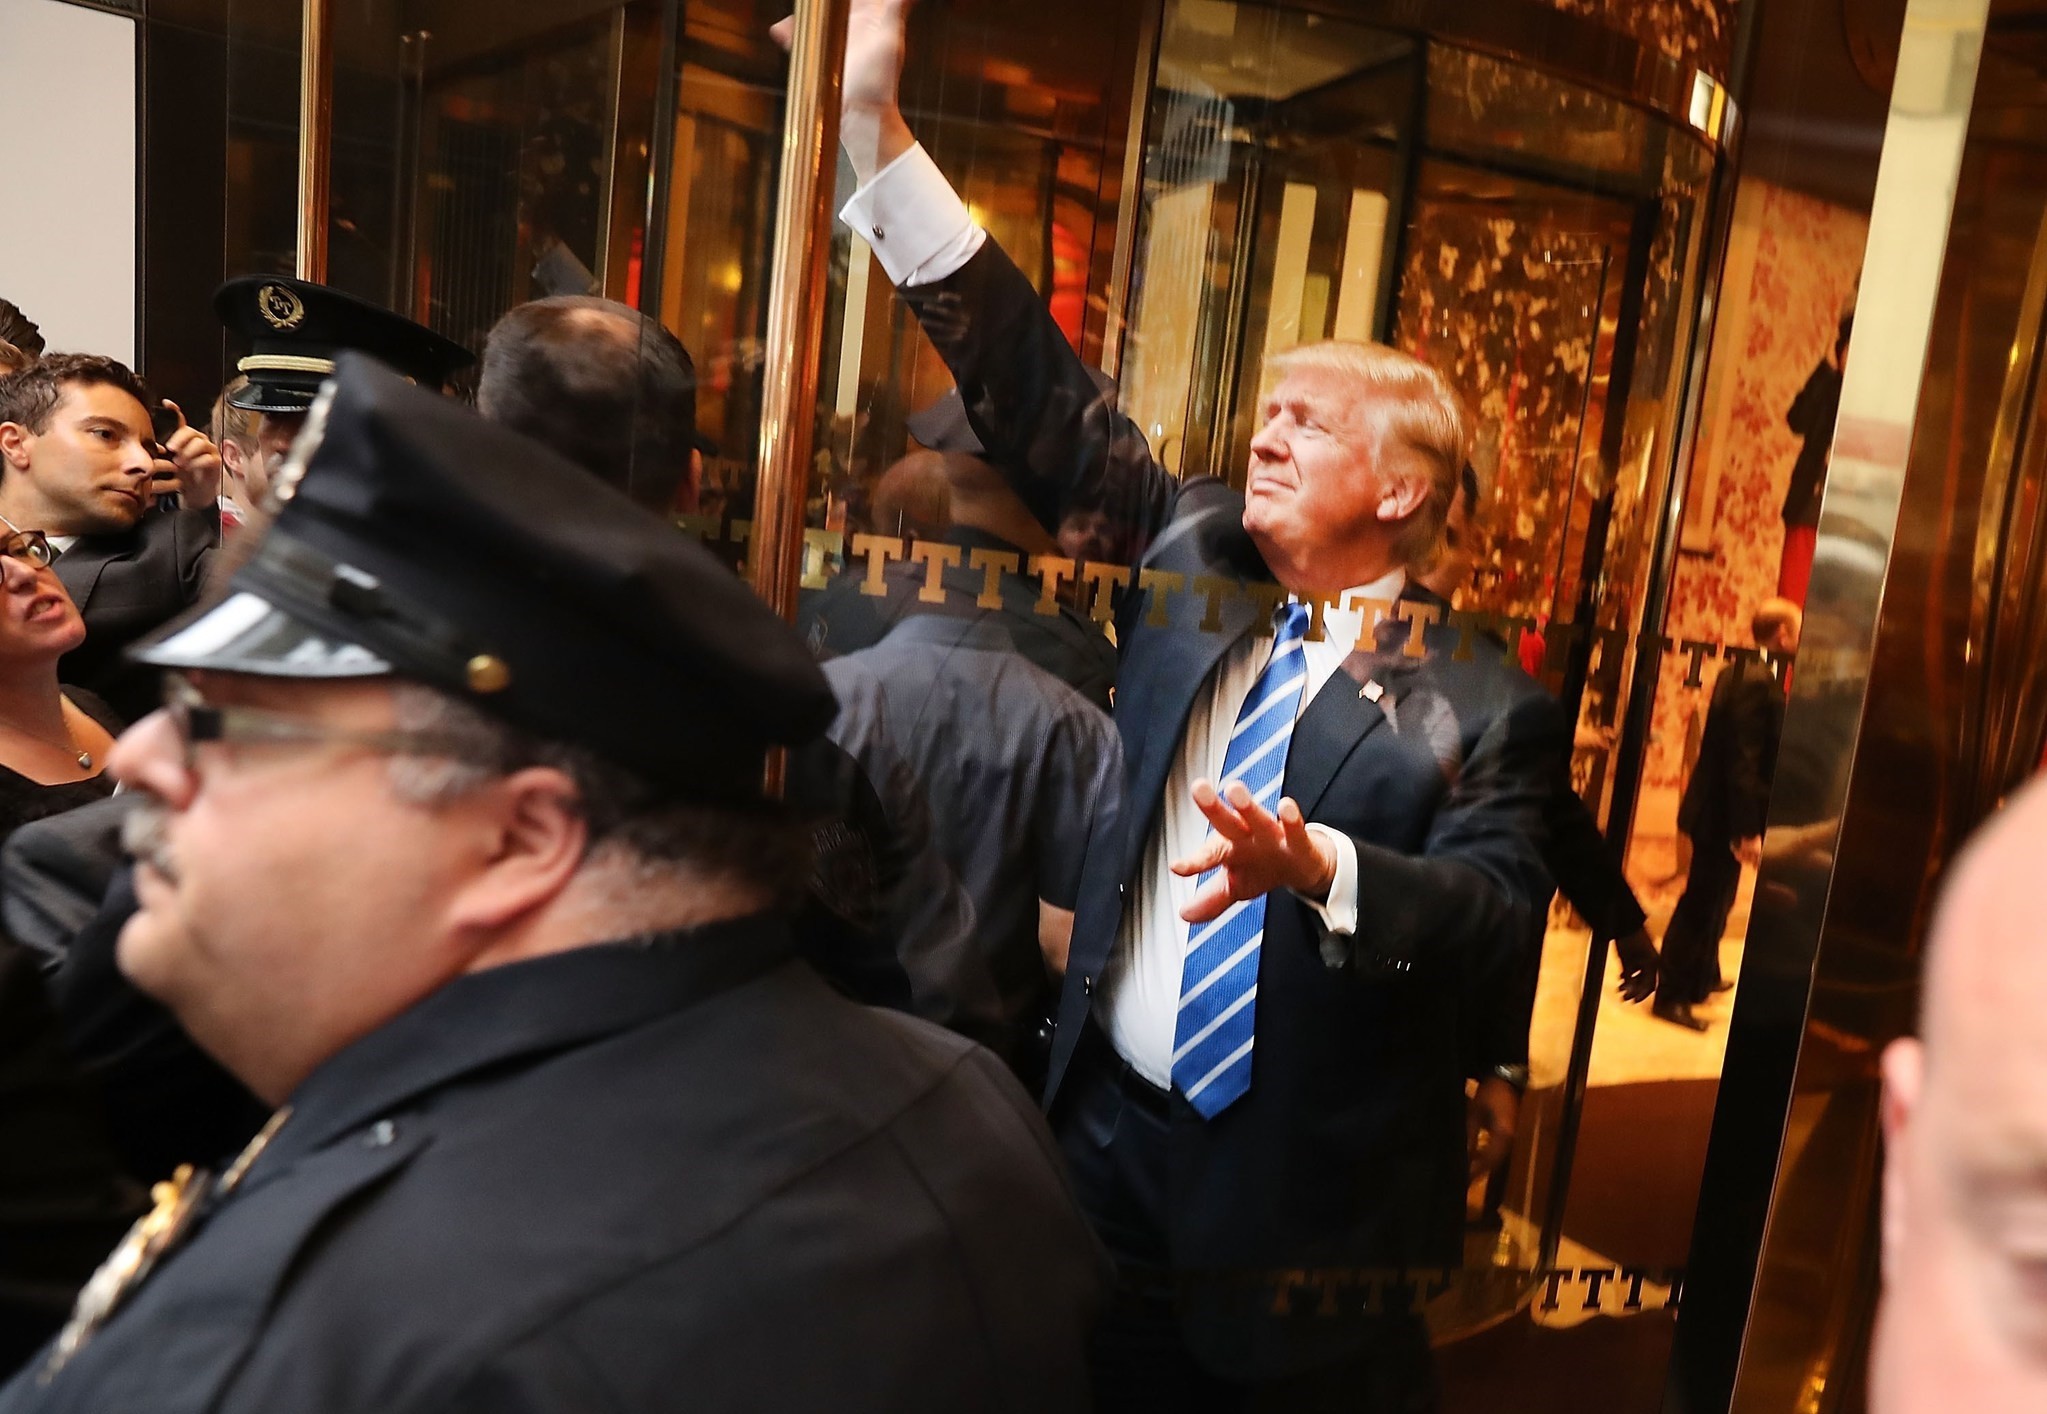  Donald Trump greets supporters outside of Trump Towers in Manhattan October 8, 2016 in New York City. (AFP Photo)